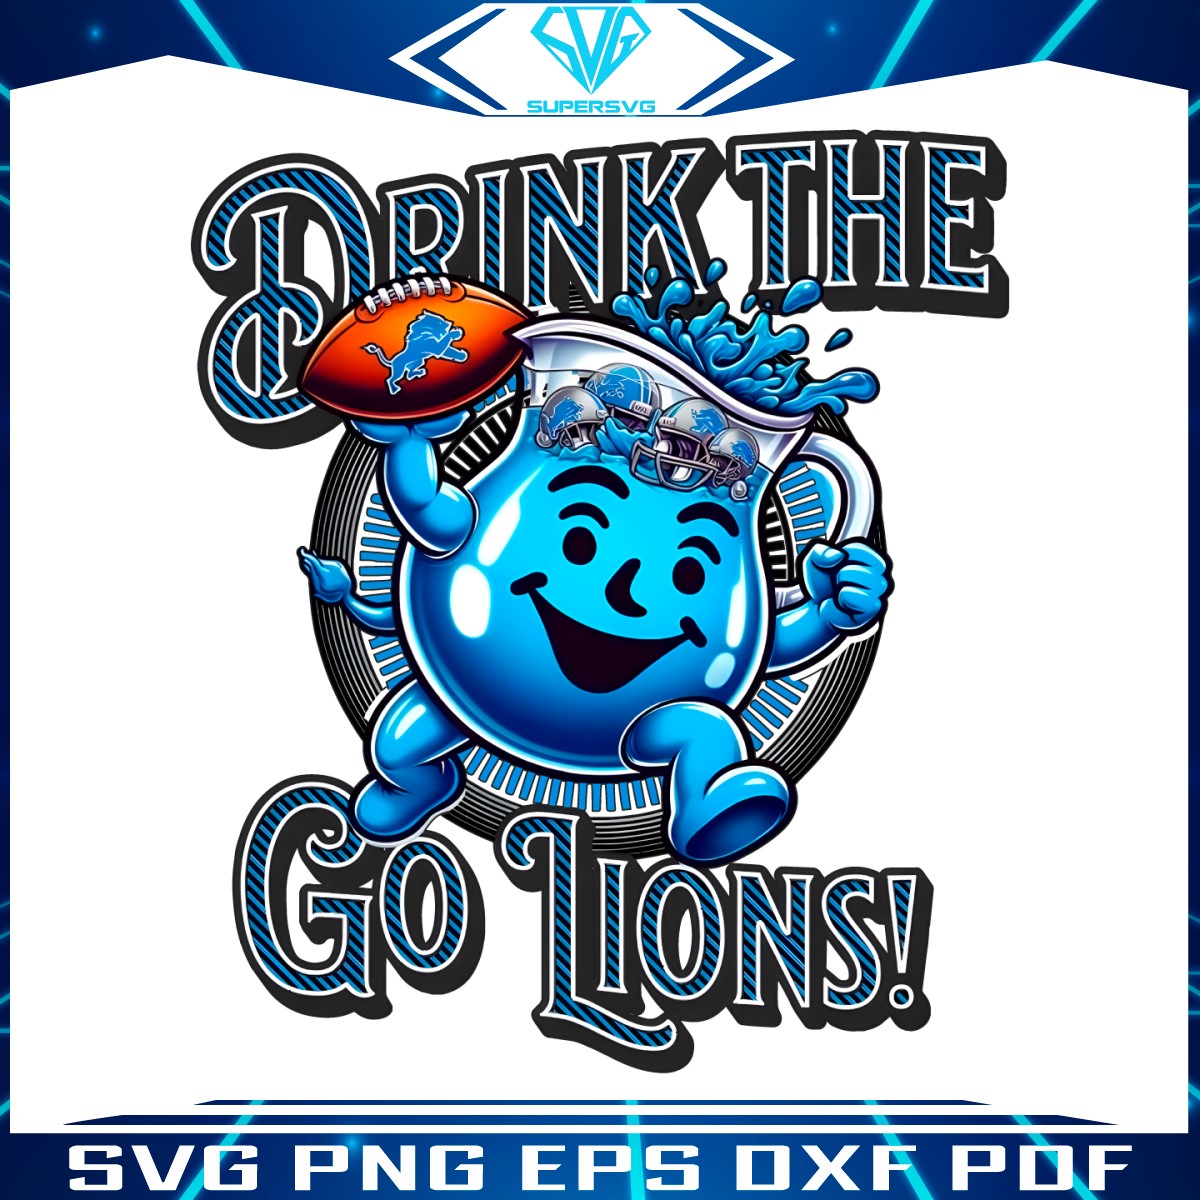 funny-drink-the-kool-aid-go-lions-png